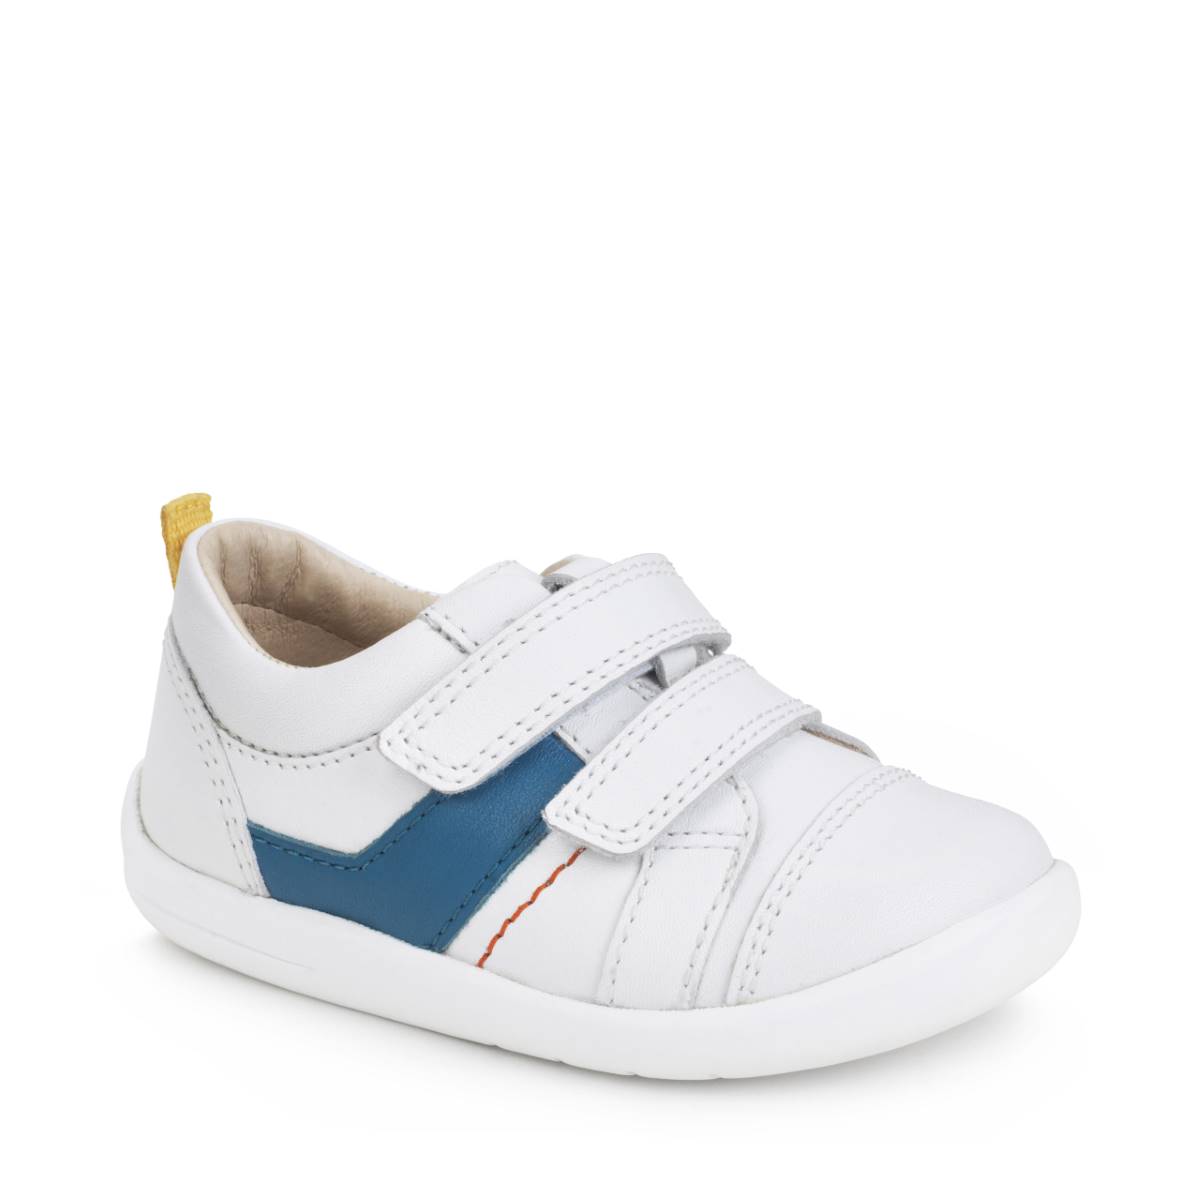 Start Rite Maze WHITE LEATHER Kids Boys Toddler Shoes 0818-46F in a Plain Leather in Size 4.5